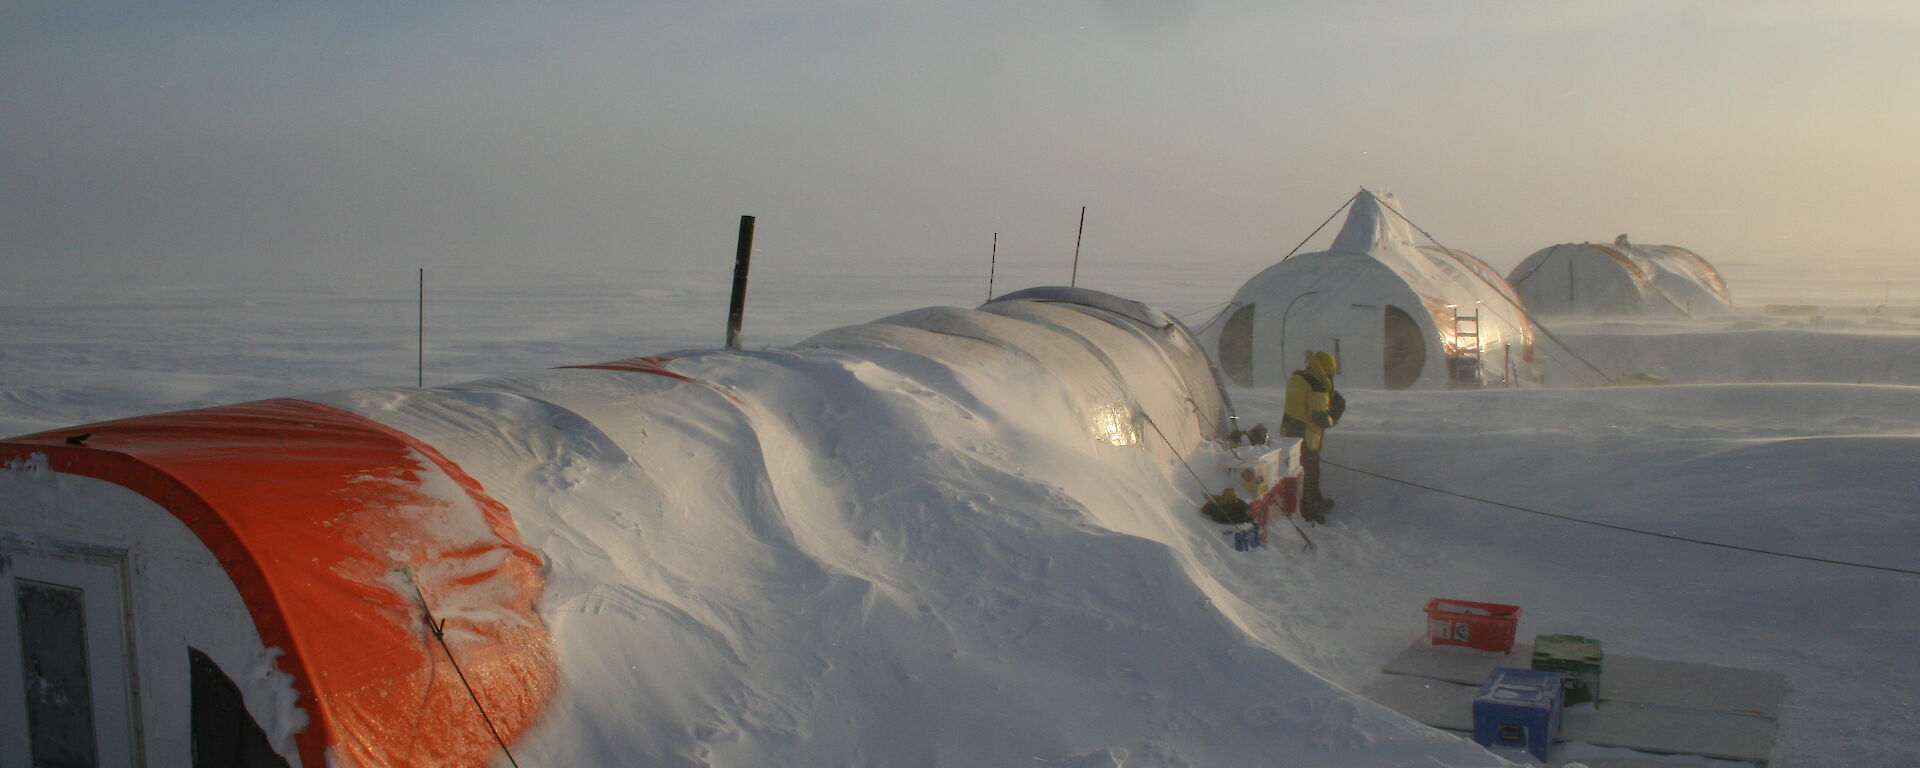 Australian ice core drilling camp after a week-long blizzard, Law Dome, Antarctica